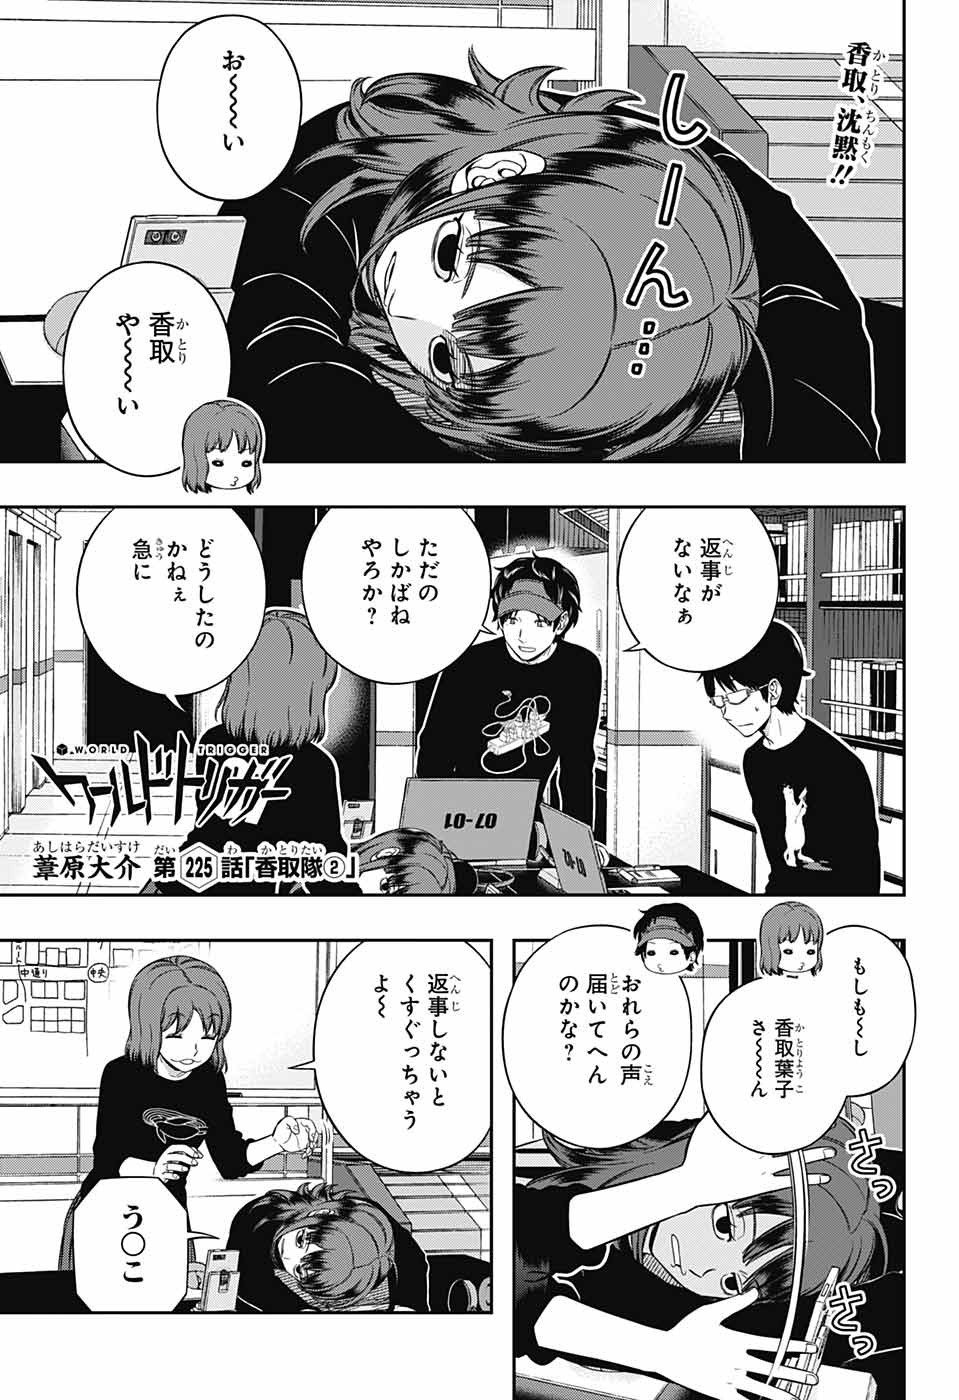 World Trigger - Chapter 225 - Page 1